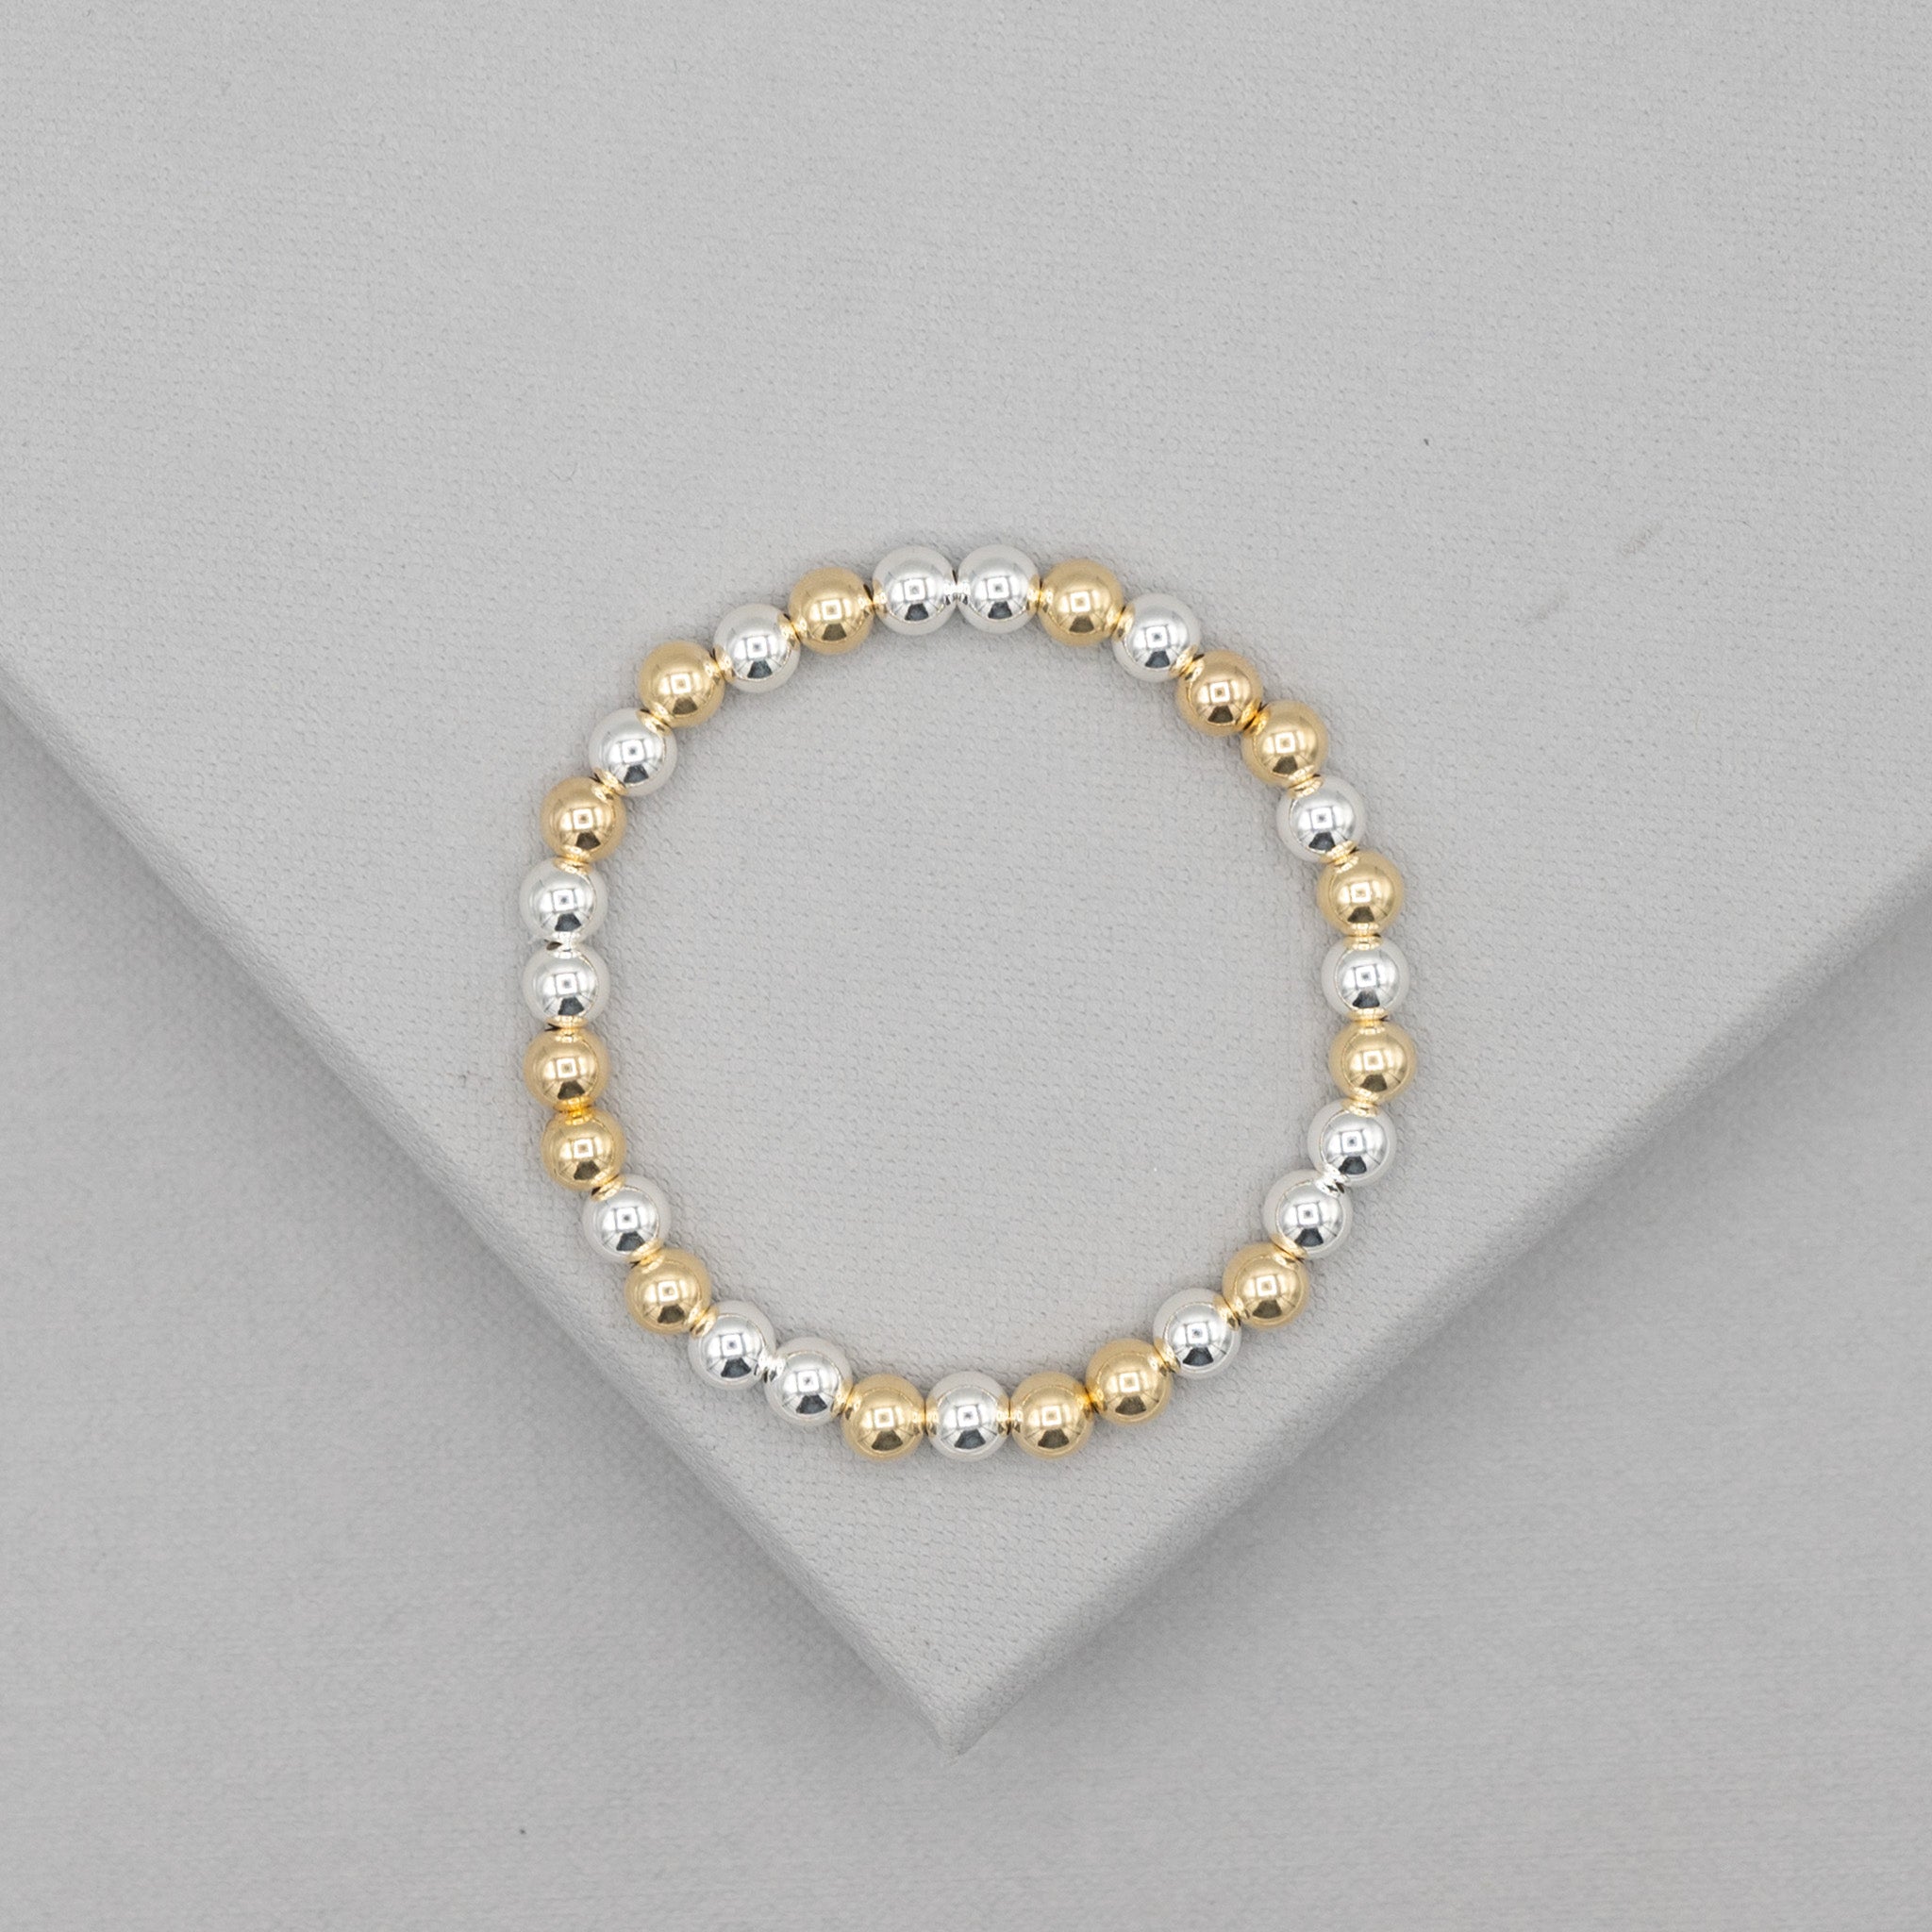 Beaded Berri (14K gold-fill) & Classic Bands (Sterling Silver